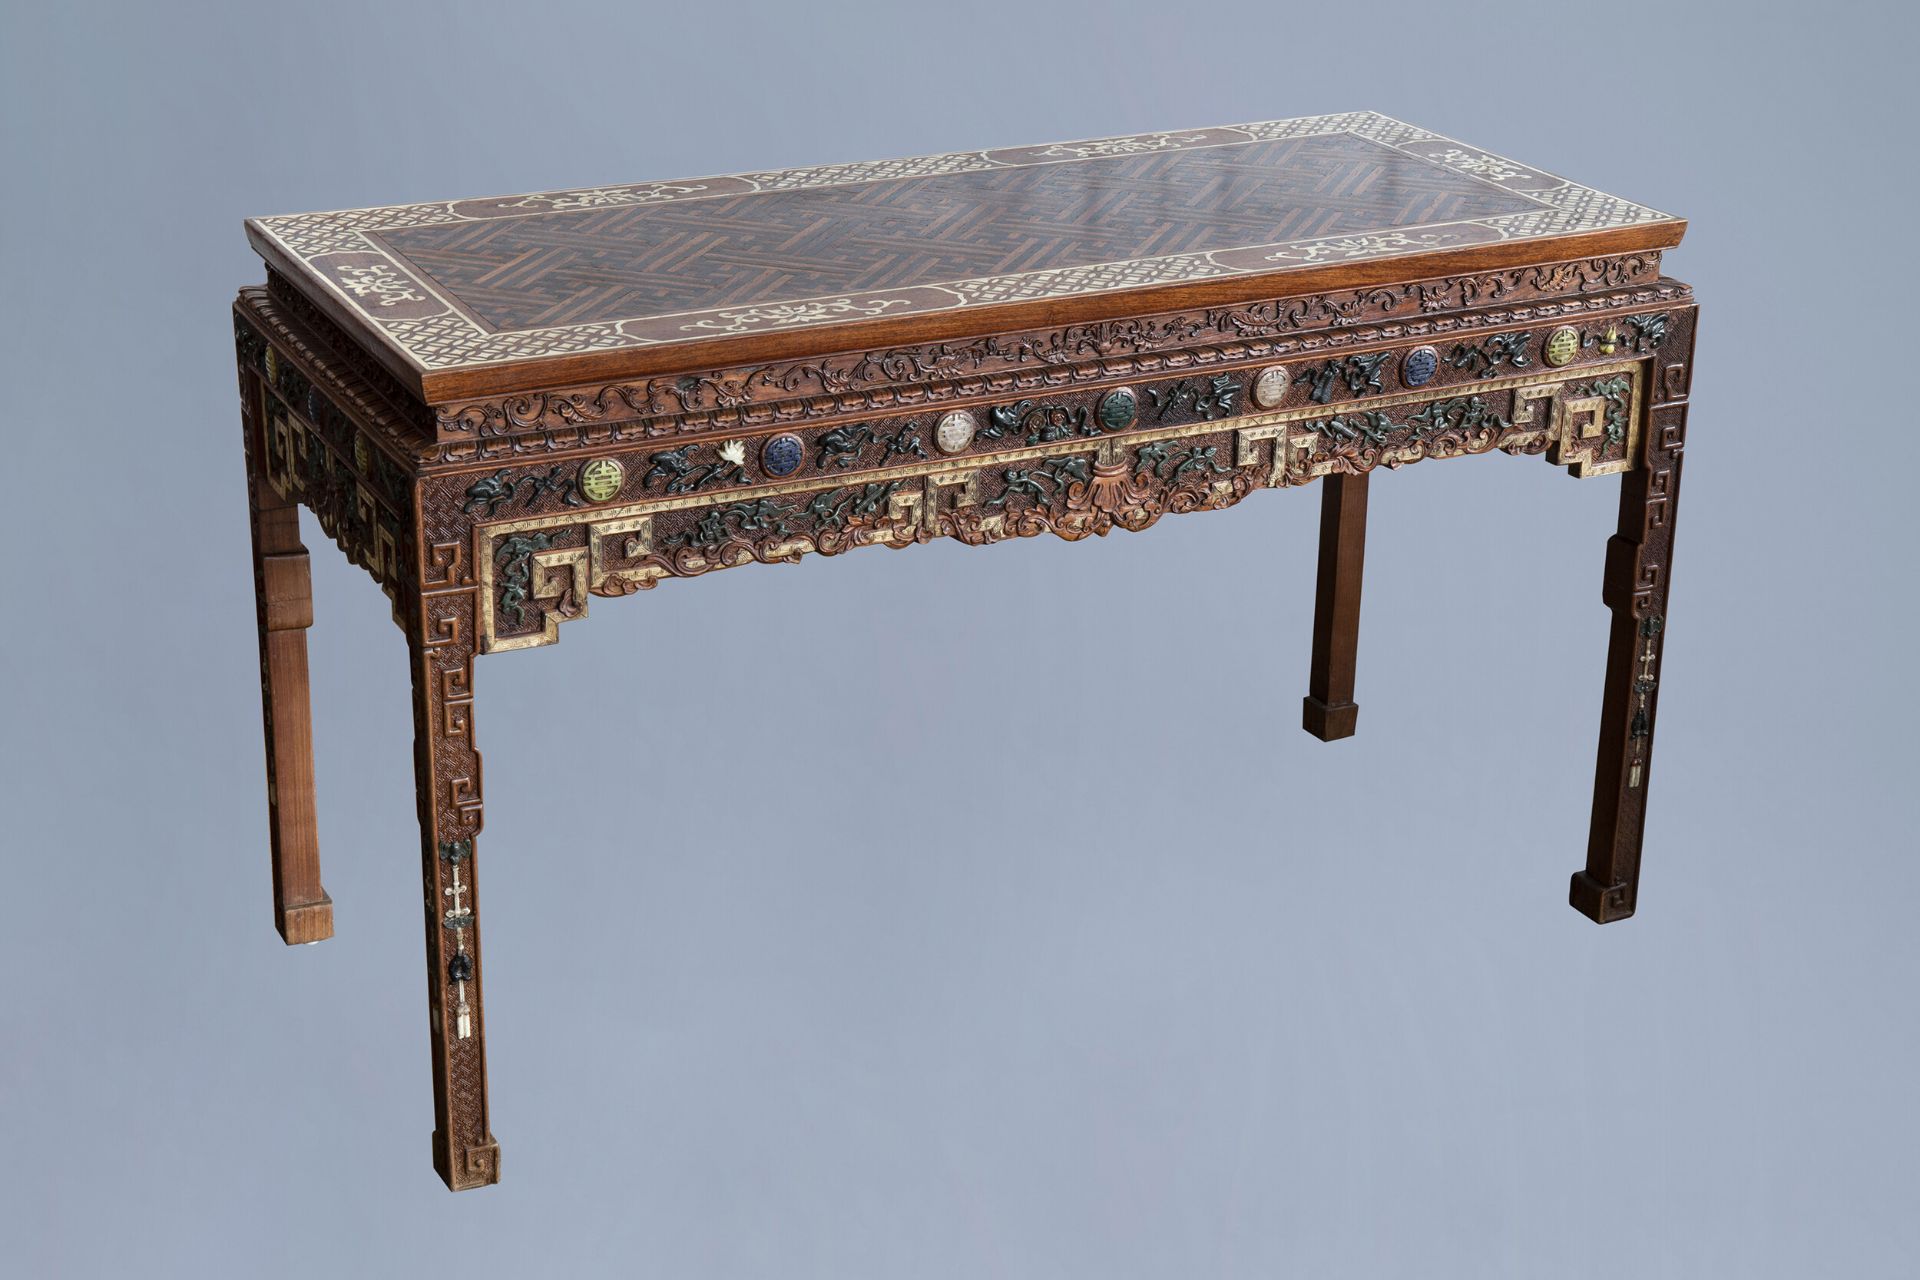 A Chinese bone and hardstone inlaid rectangular wooden table, 20th C.